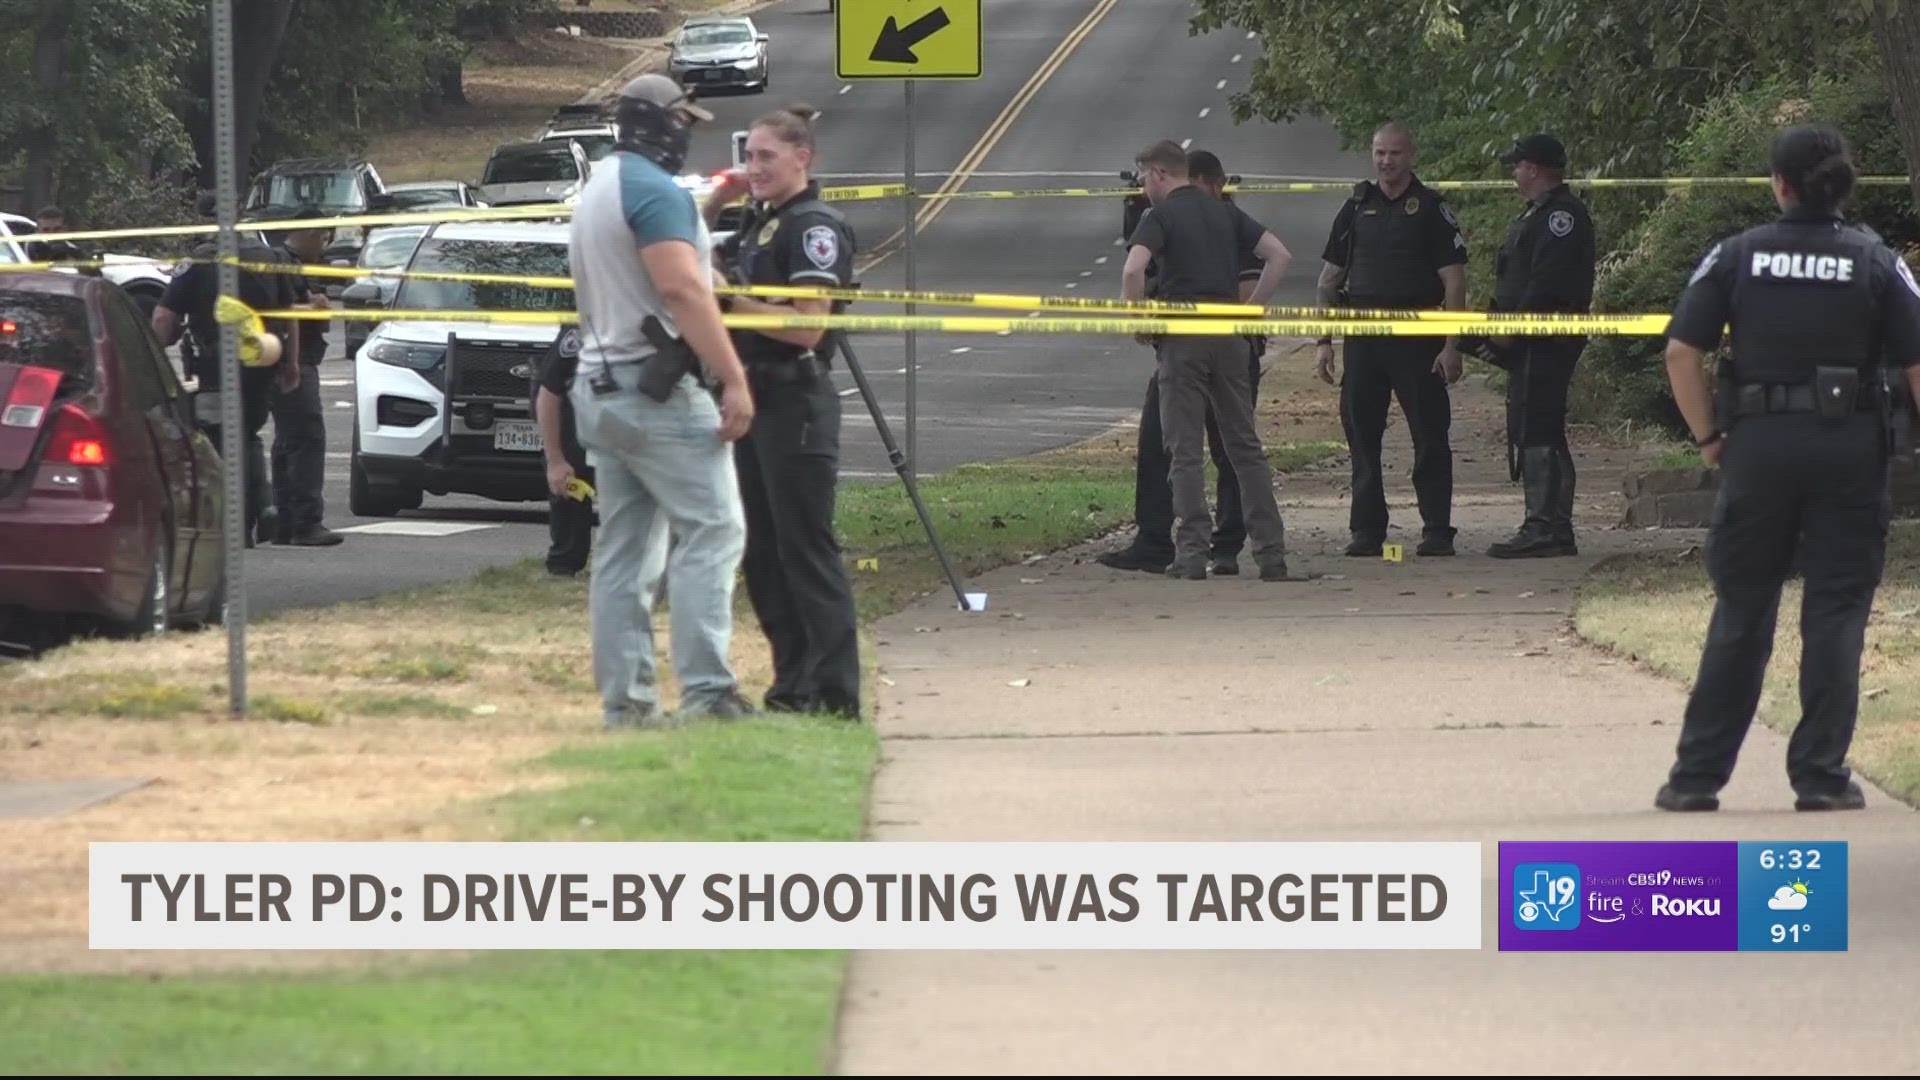 POLICE: People detained, no arrests made in connection with targeted drive-by Tyler shooting near Hubbard Middle School